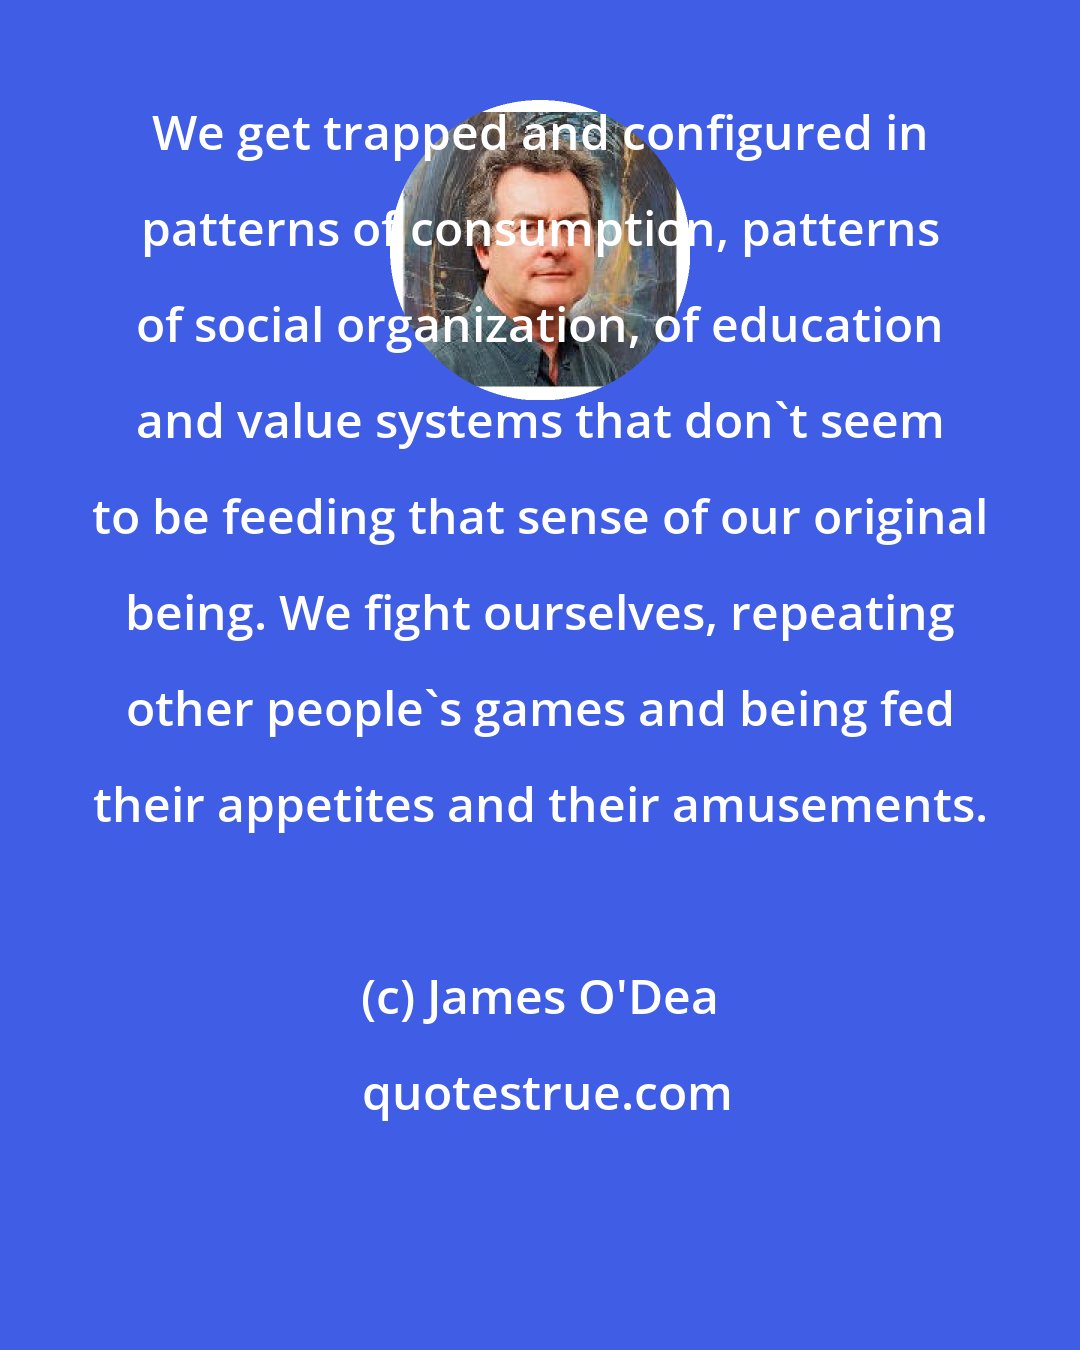 James O'Dea: We get trapped and configured in patterns of consumption, patterns of social organization, of education and value systems that don't seem to be feeding that sense of our original being. We fight ourselves, repeating other people's games and being fed their appetites and their amusements.